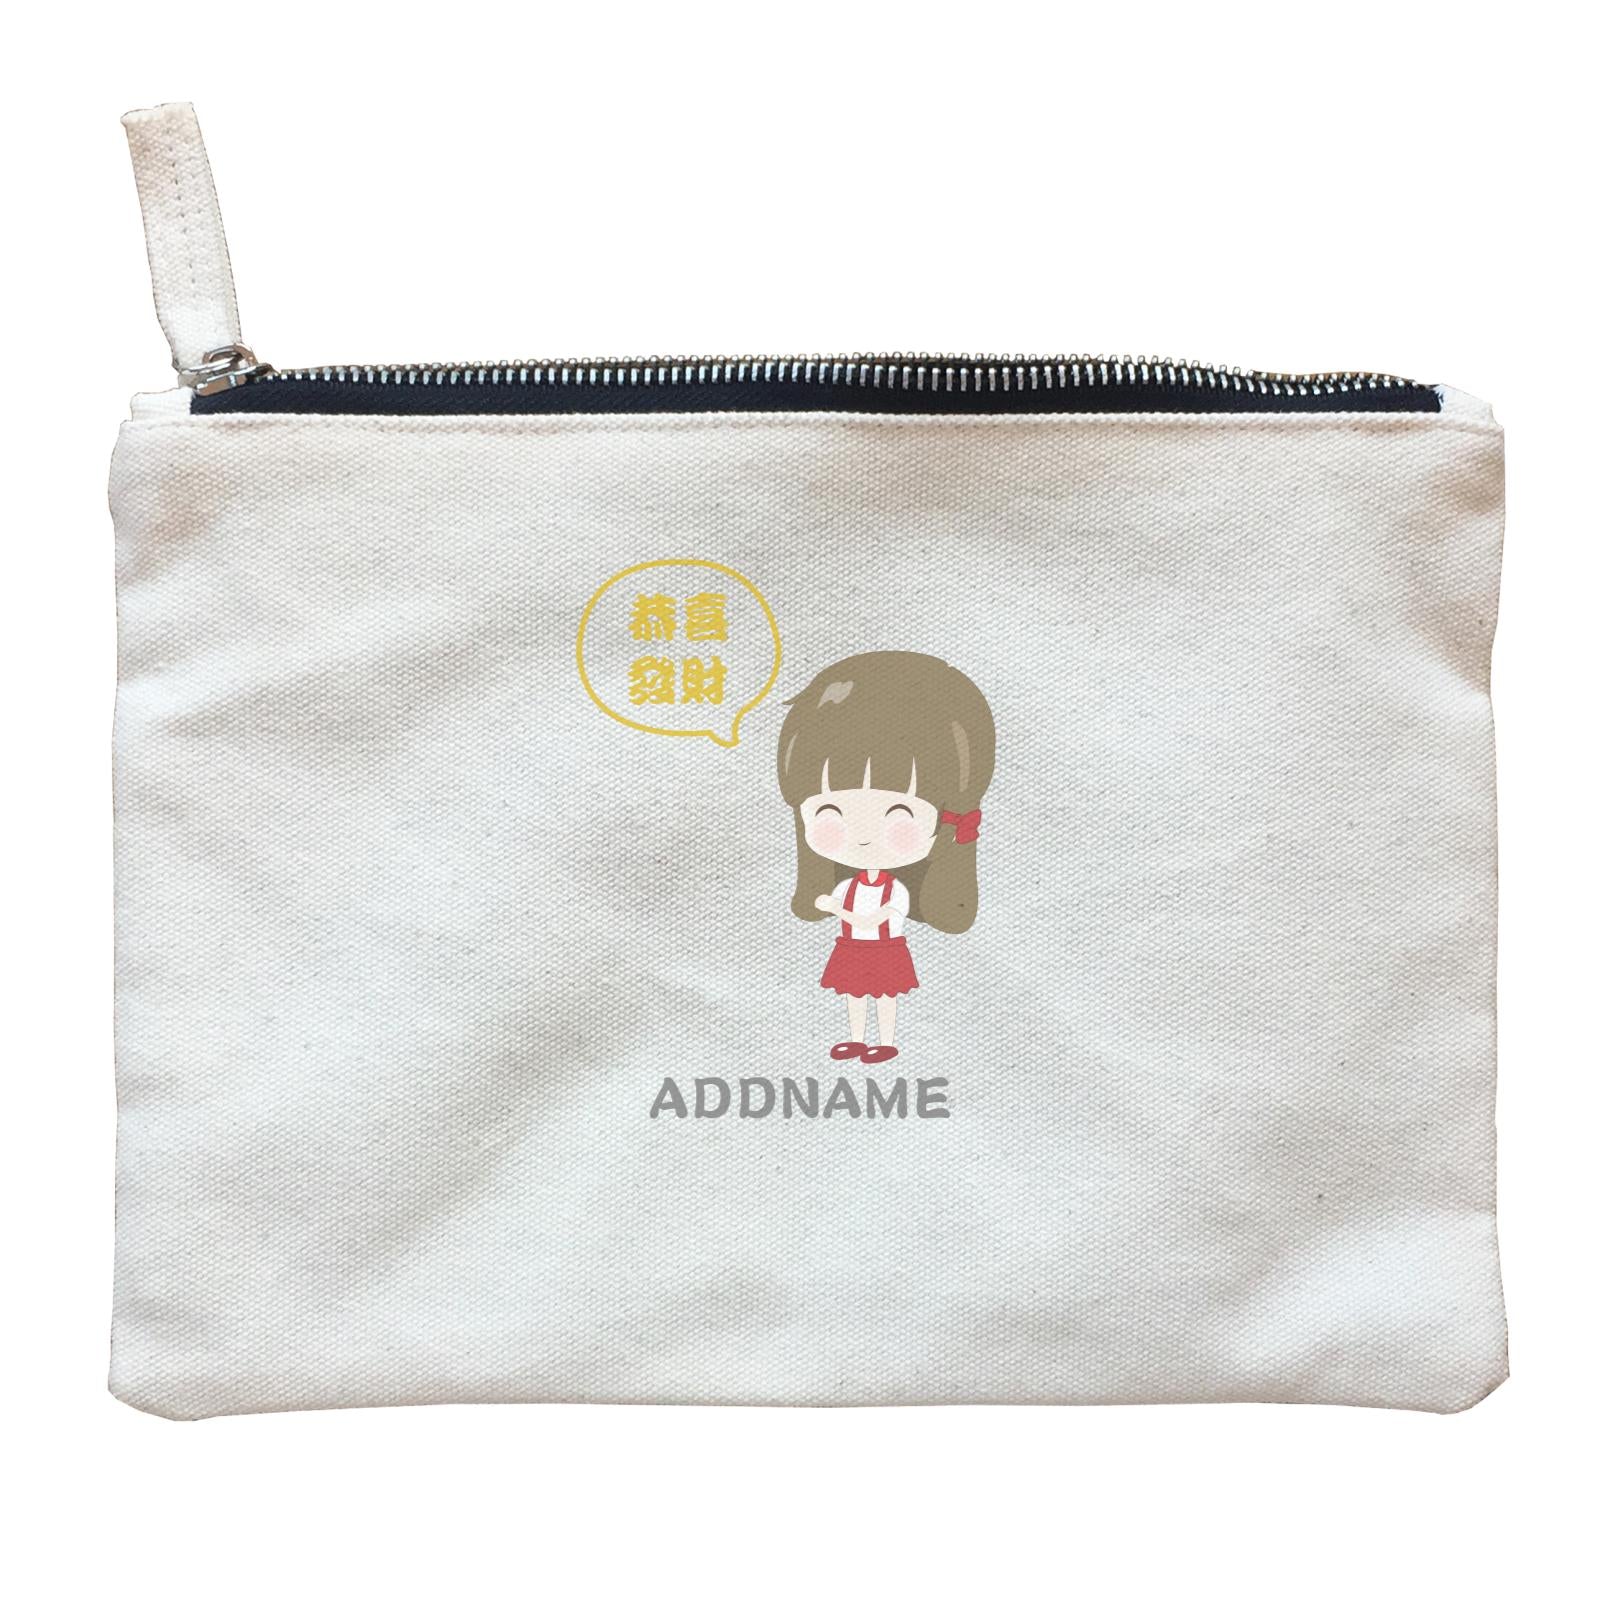 Chinese New Year Family Gong Xi Fai Cai Girl Addname Zipper Pouch